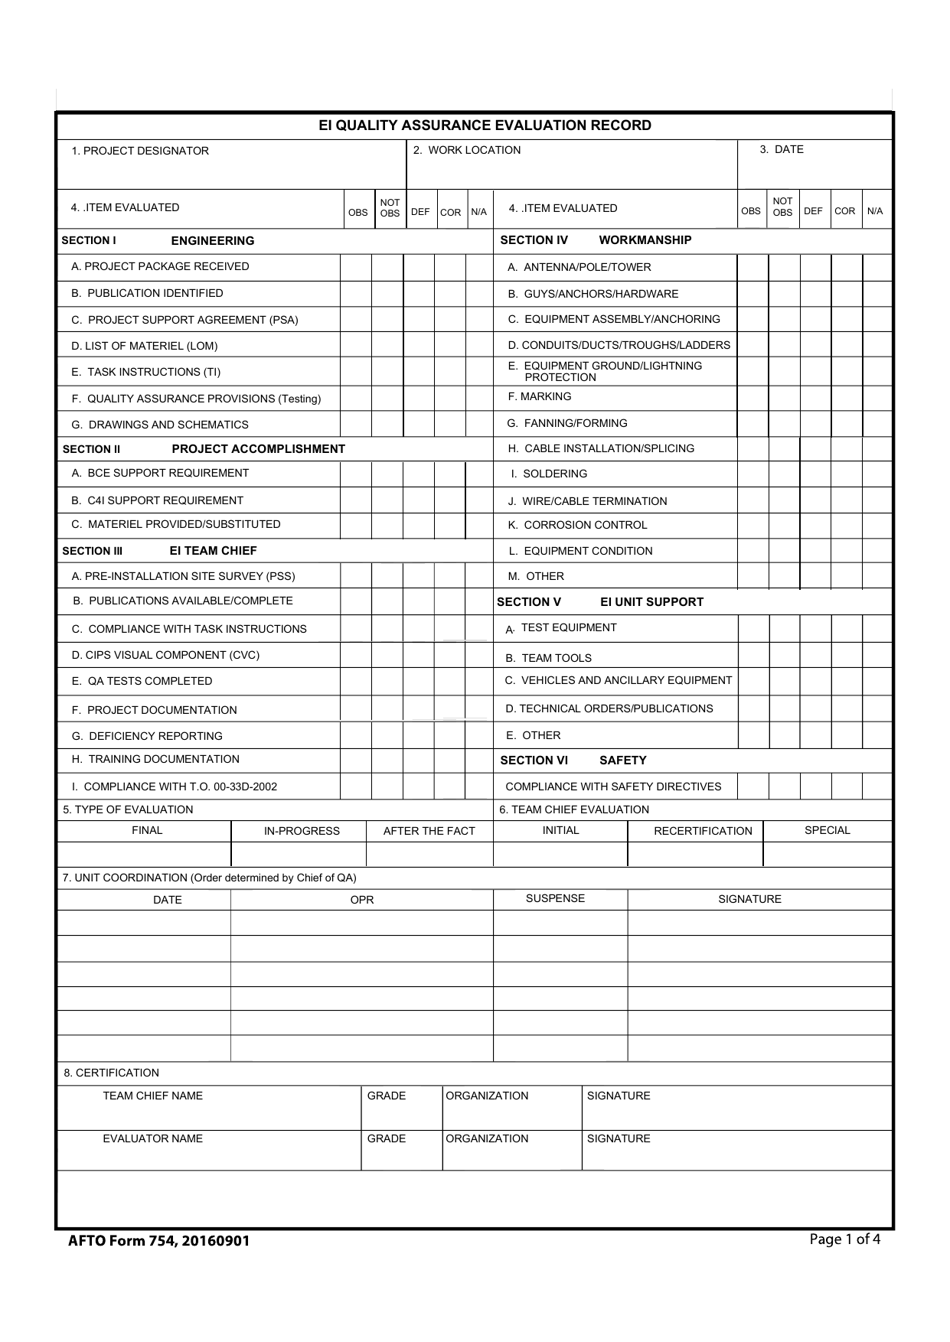 AFTO Form 754 Ei Quality Assurance Evaluation Record, Page 1